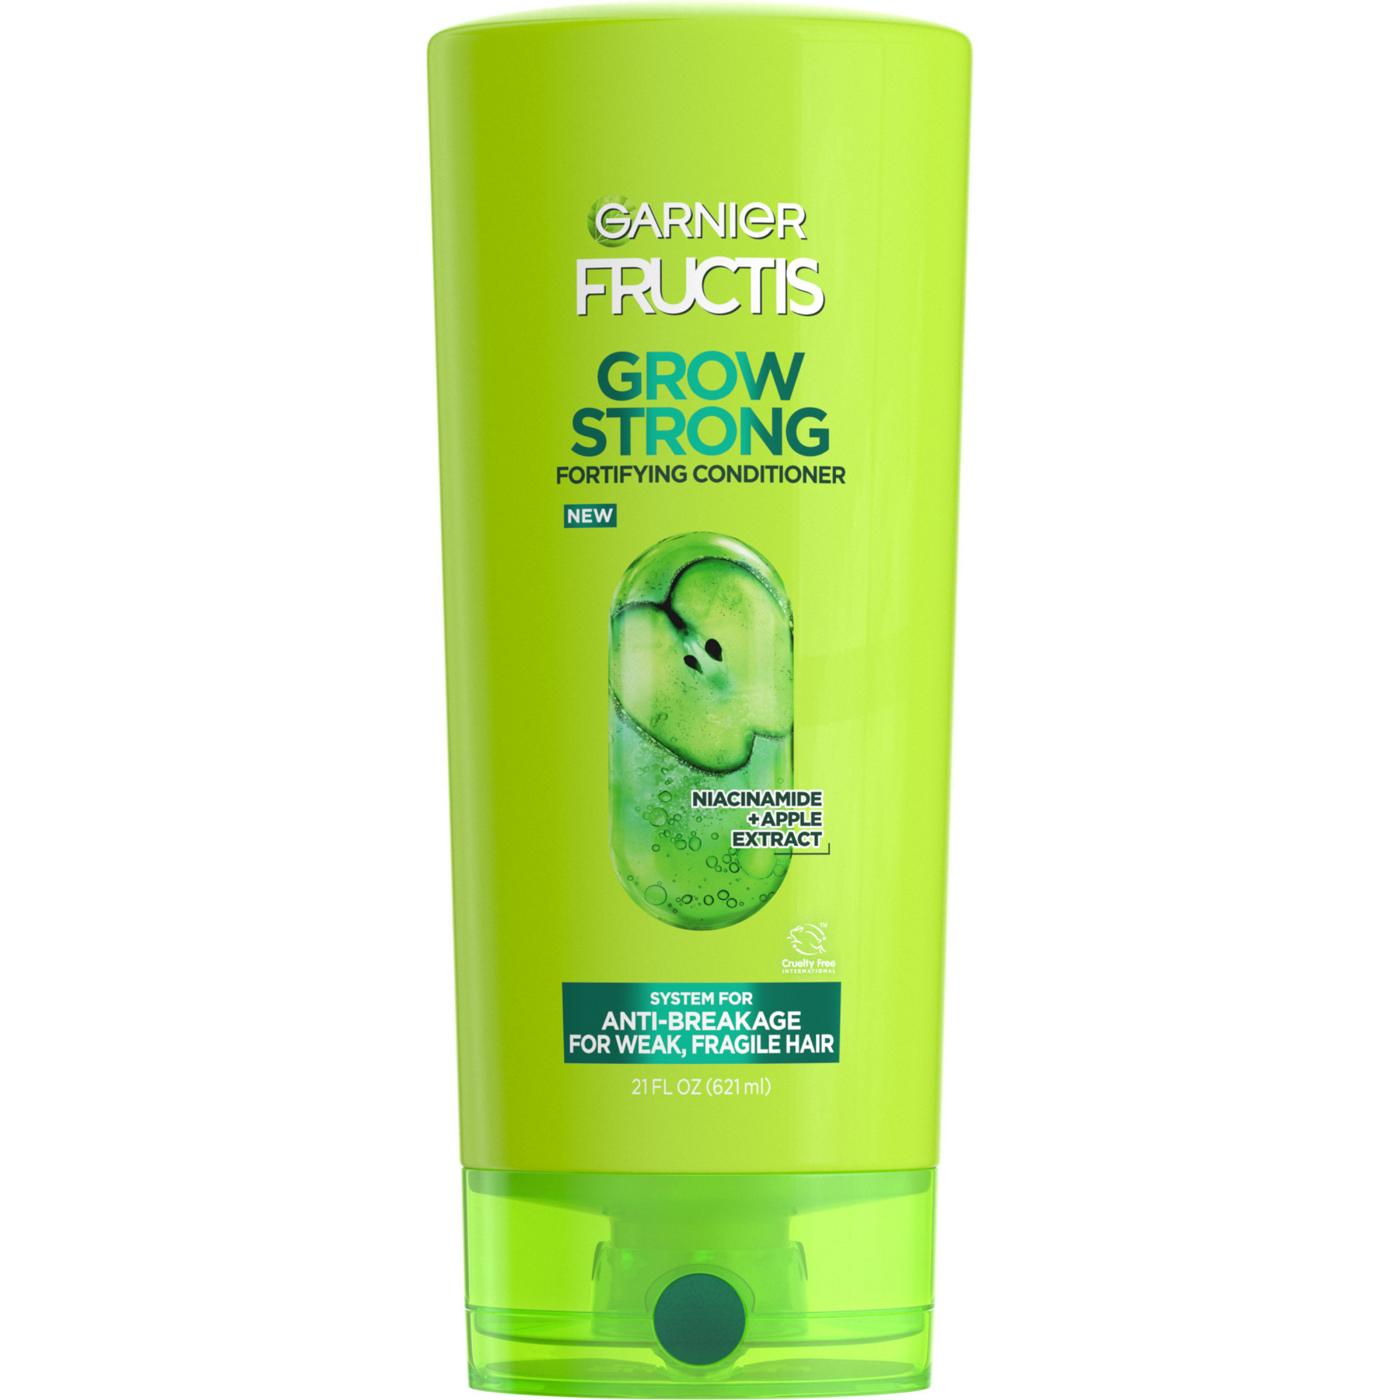 Garnier Fructis Grow Strong Fortifying Conditioner; image 1 of 9